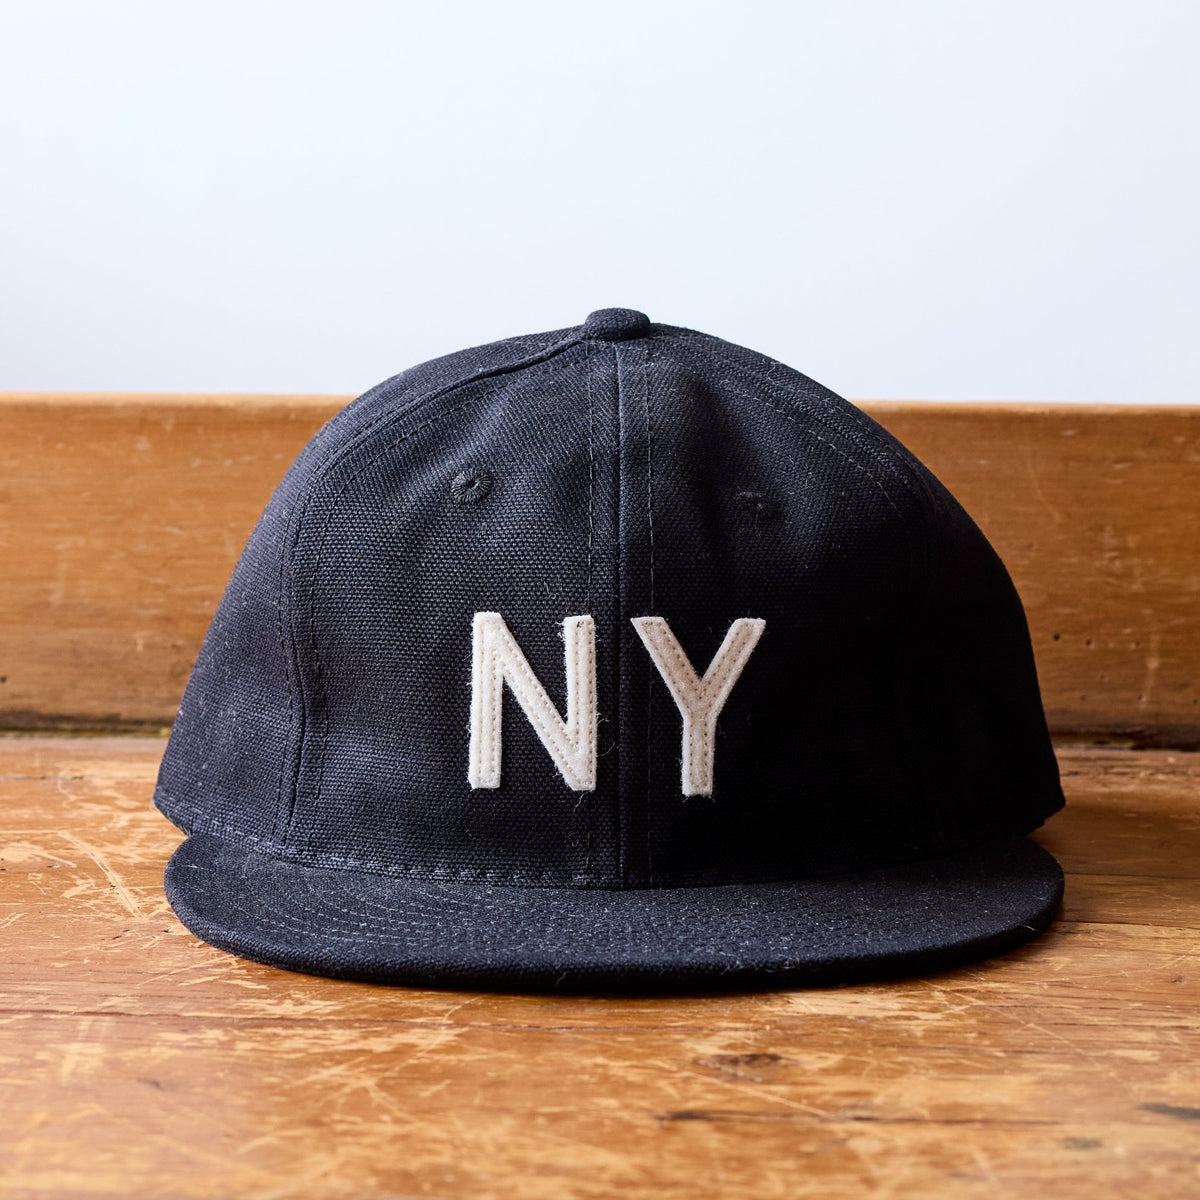 GS x Ebbets Field Flannels Cotton Canvas Hat: Black / White NY - grown&amp;sewn